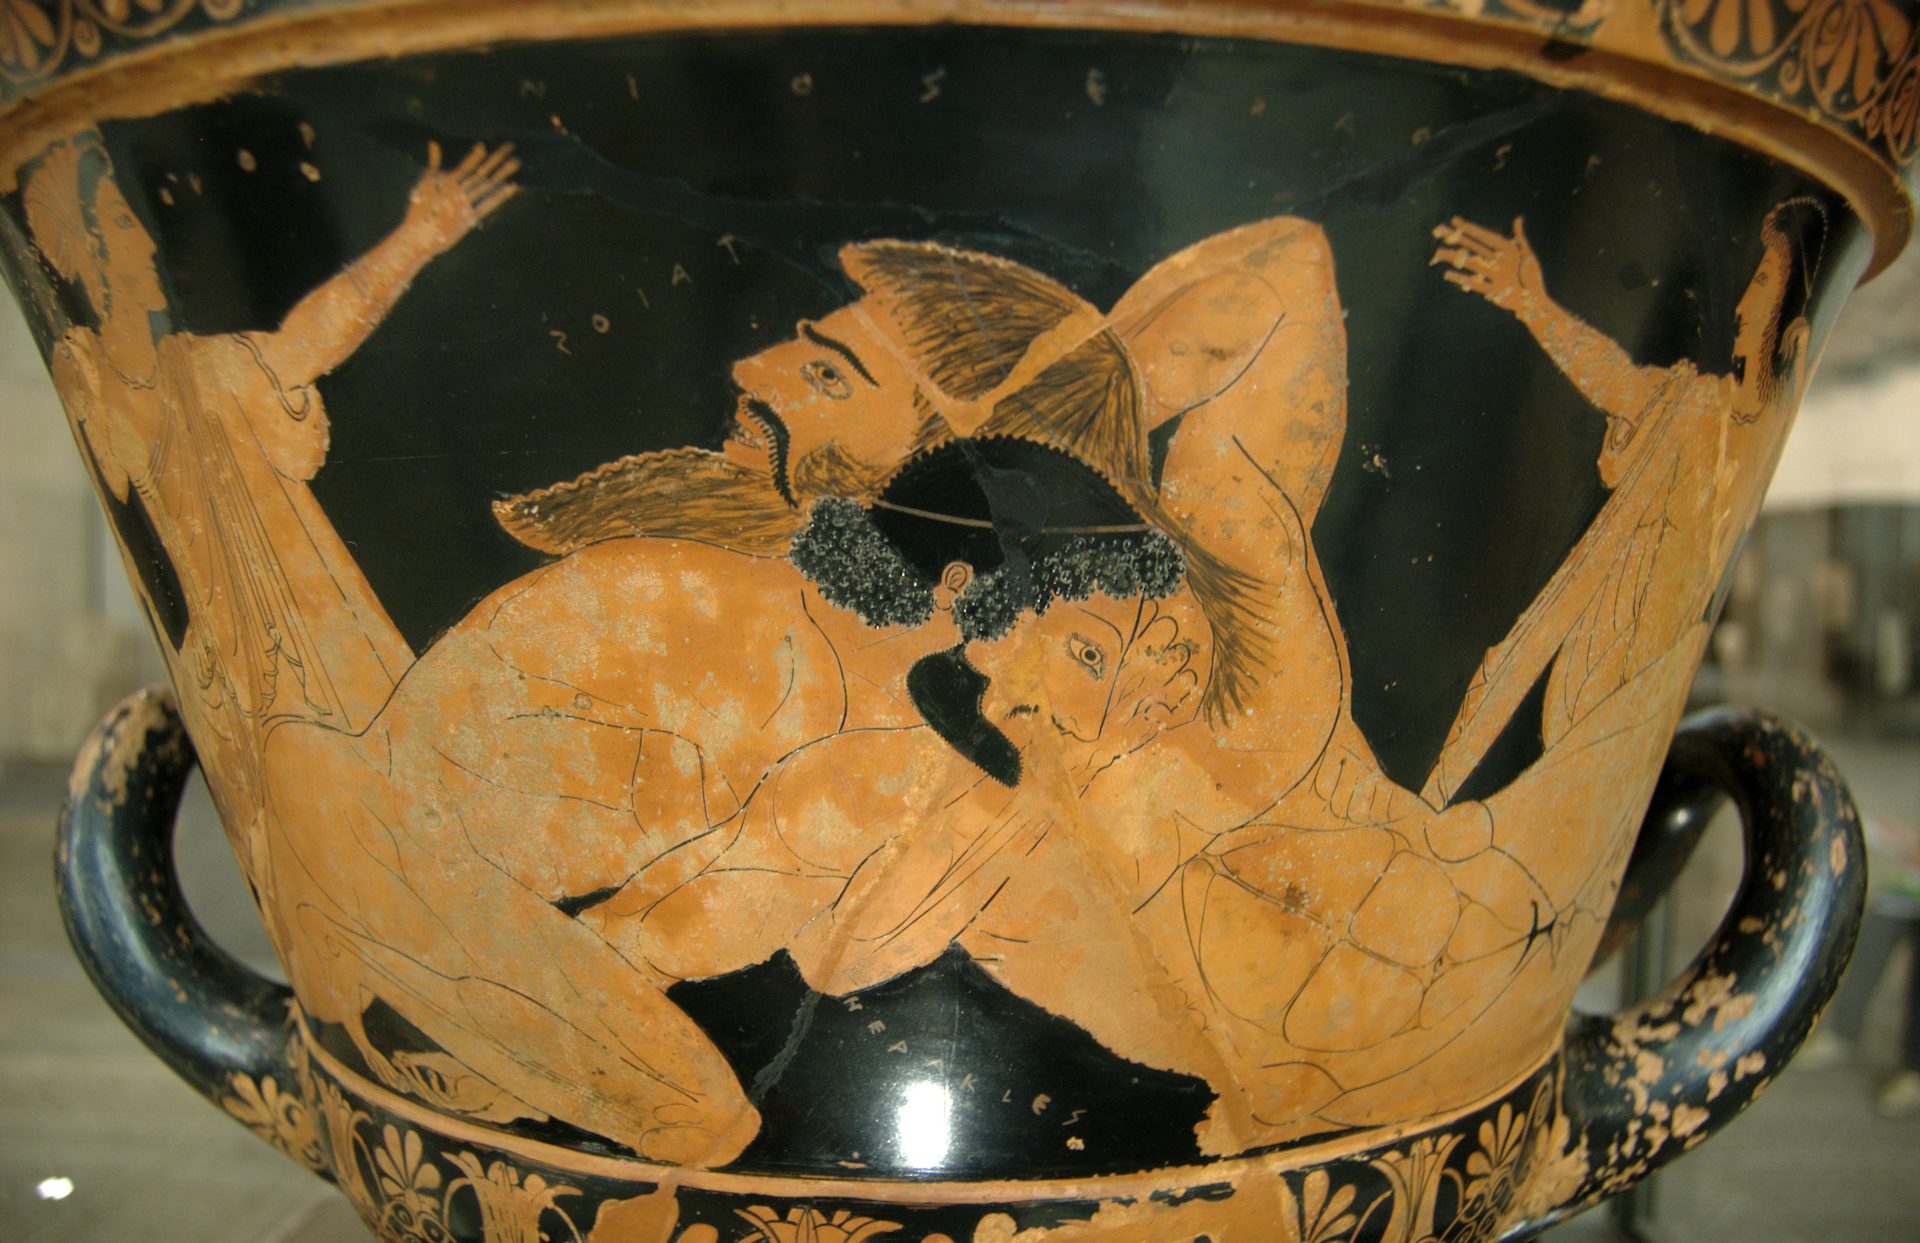 Vase painting of Heracles wrestling with Antaeus